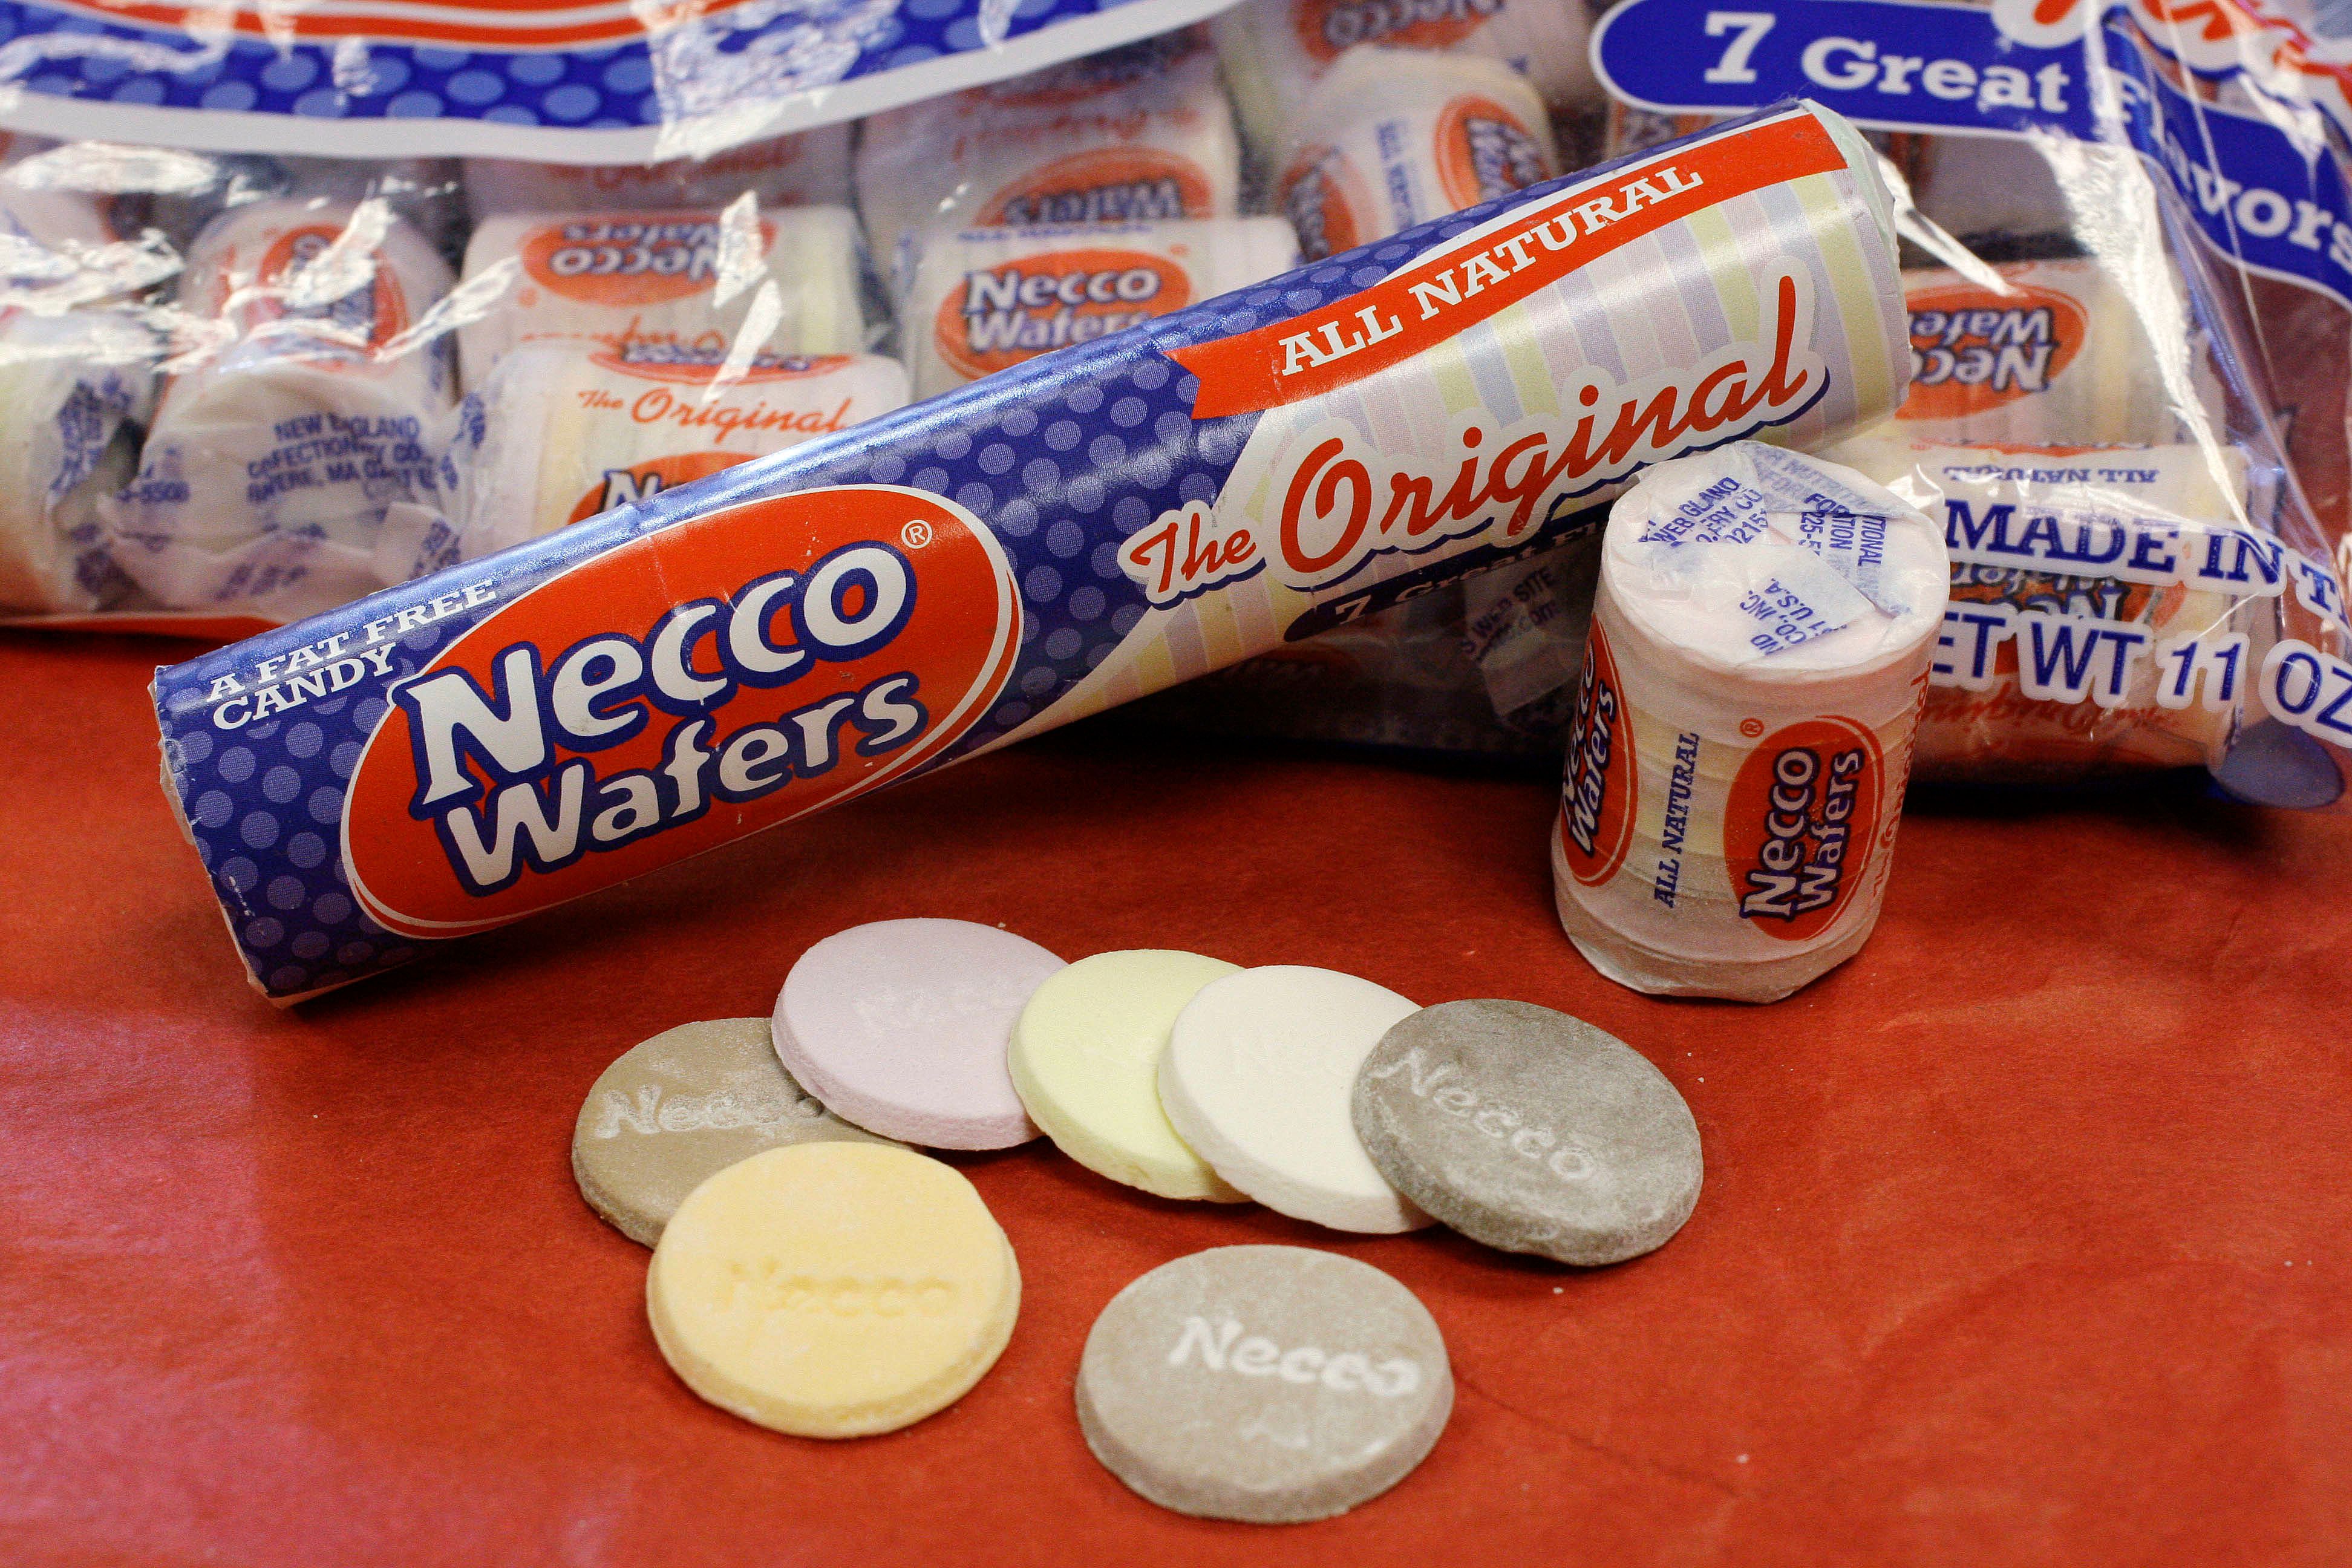 The Maker Of Candy Hearts Filed Bankruptcy, But Don't Worry, That's Not The End Of Them